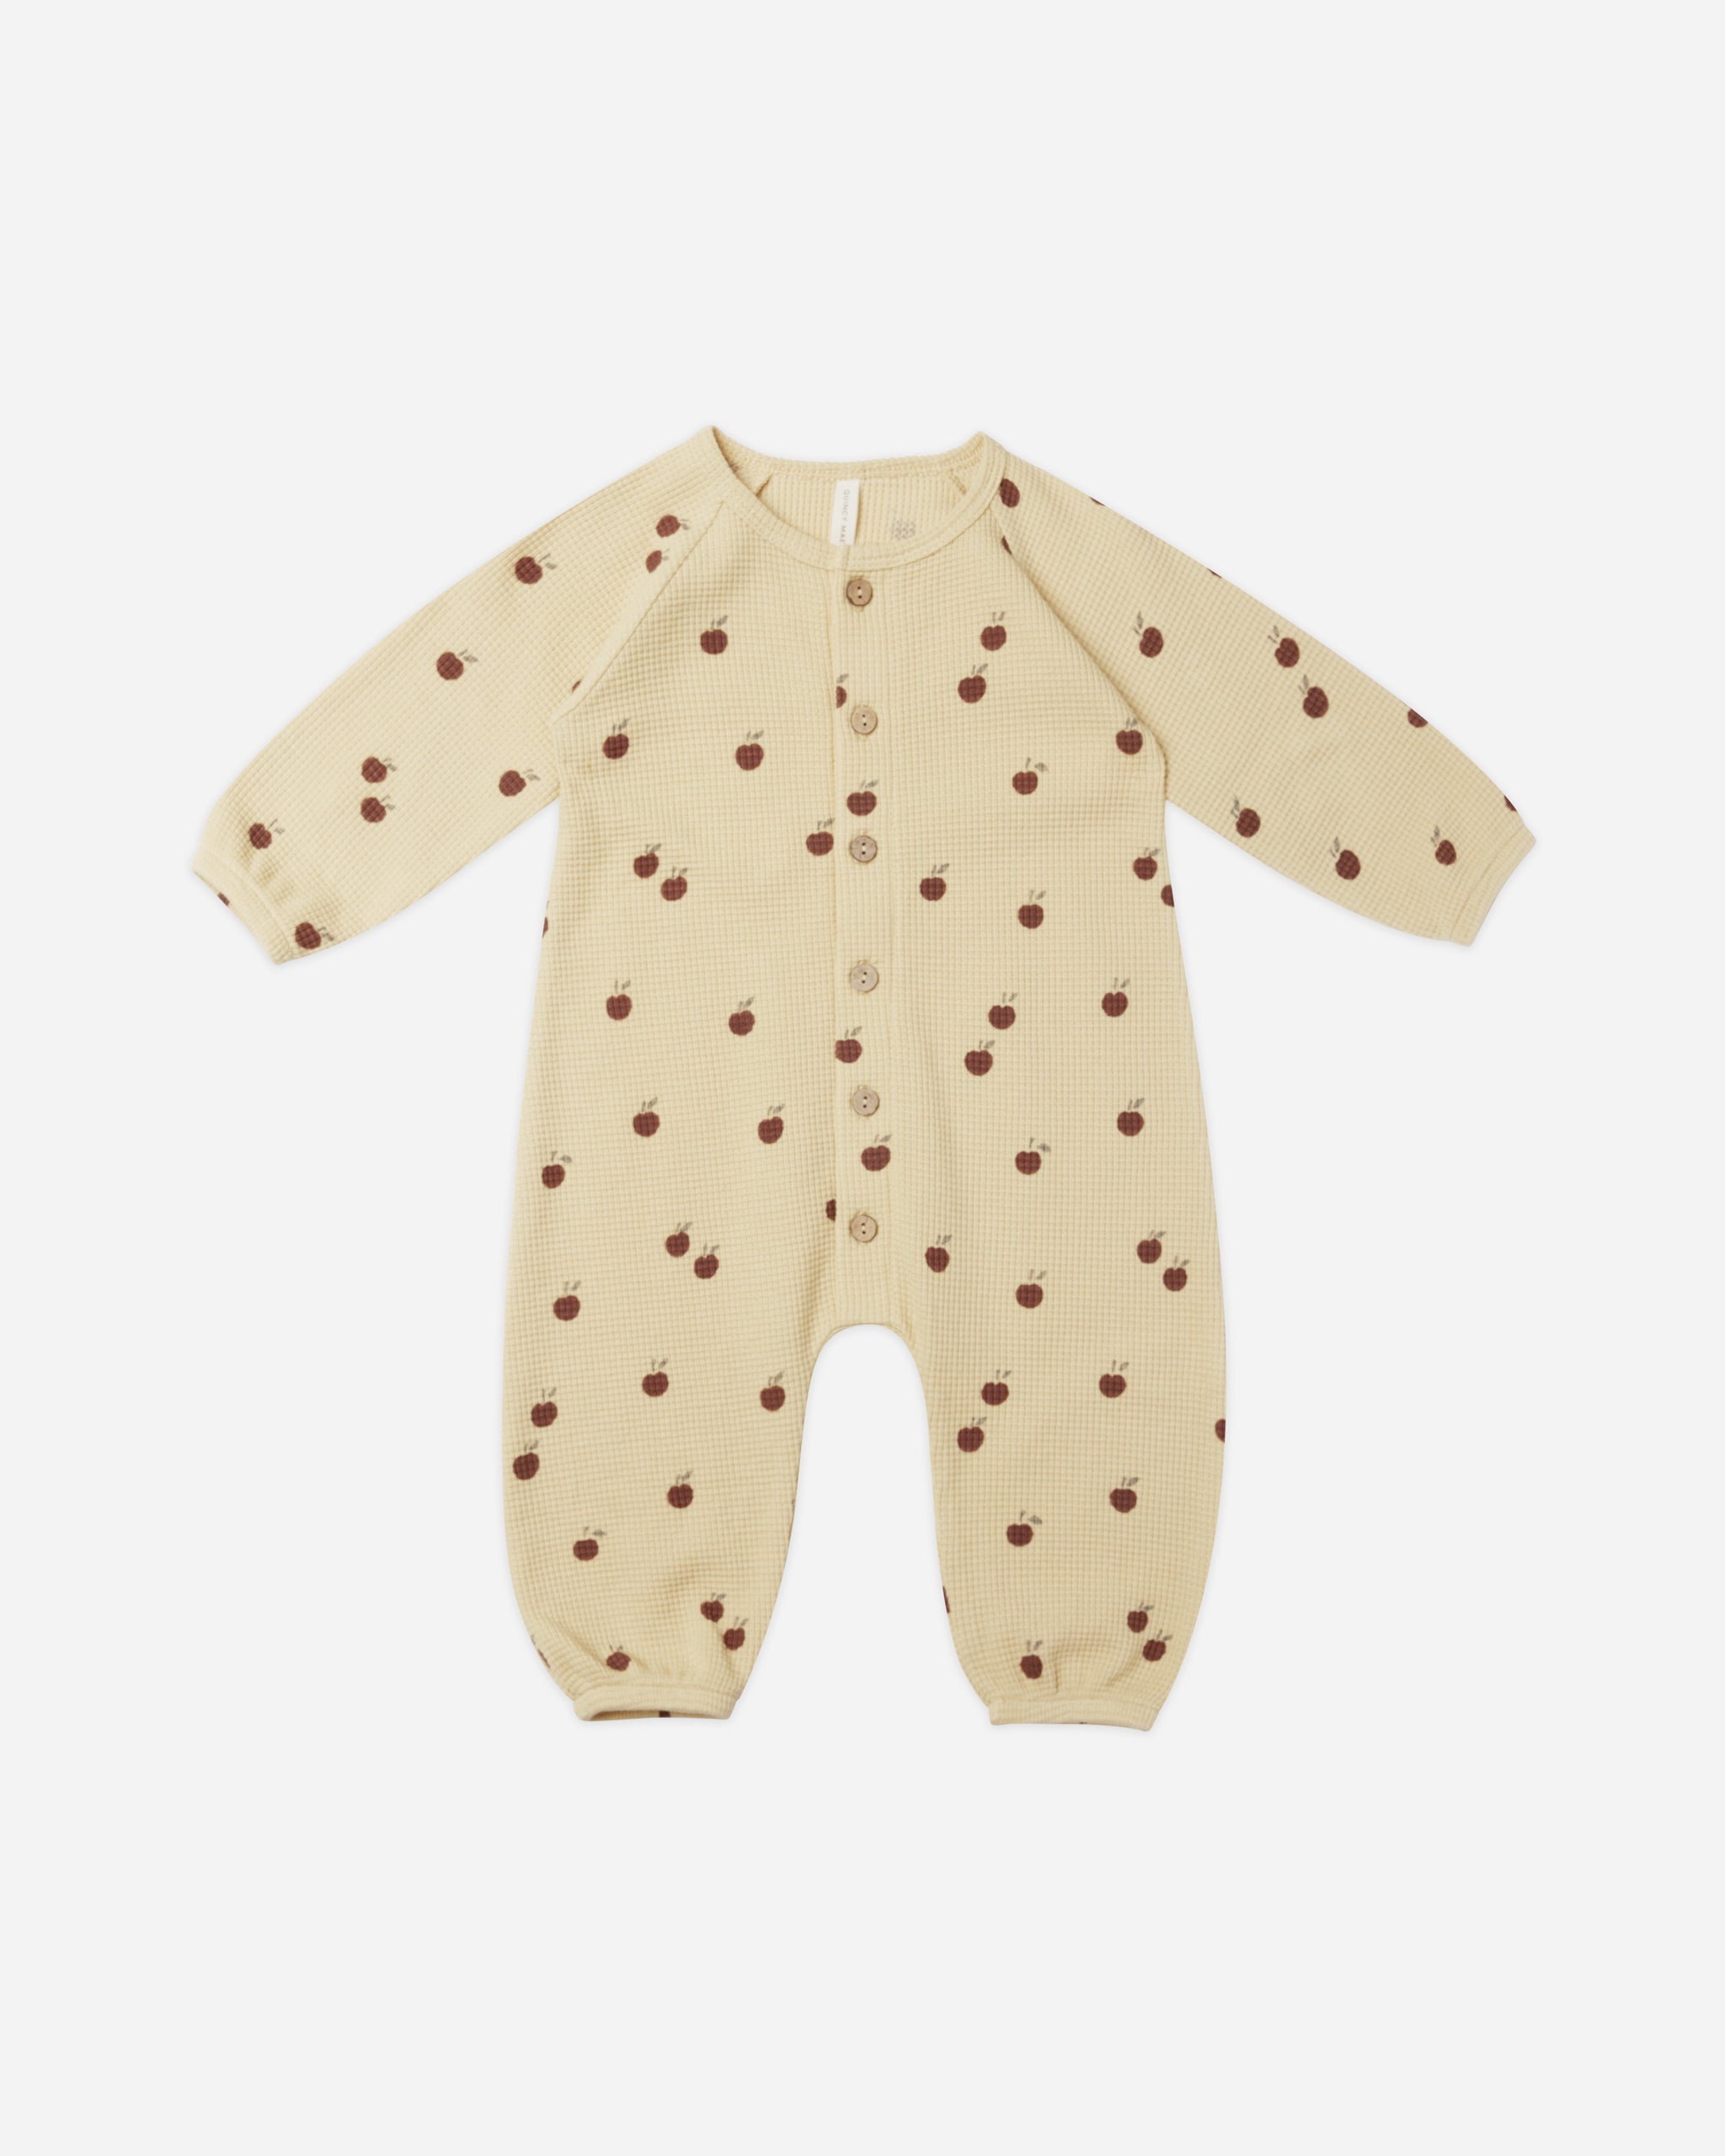 Waffle Long Sleeve Jumpsuit || Apples - Rylee + Cru | Kids Clothes | Trendy Baby Clothes | Modern Infant Outfits |